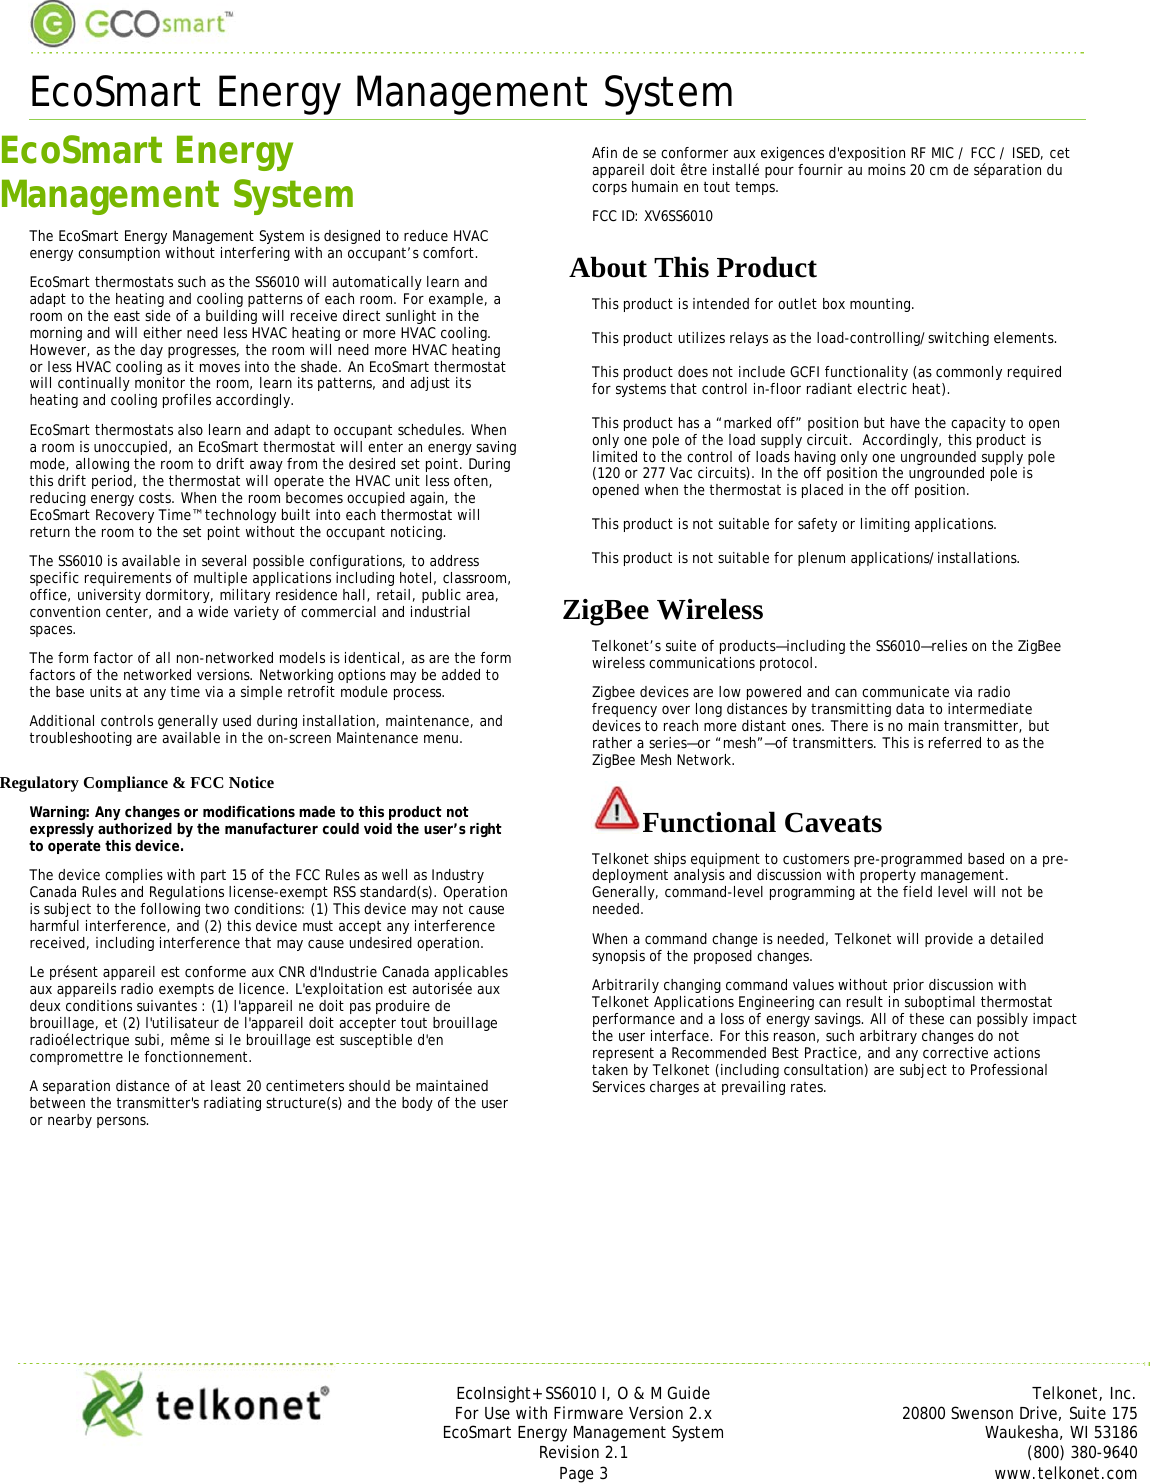  EcoSmart Energy Management System    EcoInsight+ SS6010 I, O &amp; M Guide Telkonet, Inc. For Use with Firmware Version 2.x 20800 Swenson Drive, Suite 175 EcoSmart Energy Management System Waukesha, WI 53186 Revision 2.1  (800) 380-9640 Page 3  www.telkonet.com  EcoSmart Energy Management System The EcoSmart Energy Management System is designed to reduce HVAC energy consumption without interfering with an occupant’s comfort. EcoSmart thermostats such as the SS6010 will automatically learn and adapt to the heating and cooling patterns of each room. For example, a room on the east side of a building will receive direct sunlight in the morning and will either need less HVAC heating or more HVAC cooling. However, as the day progresses, the room will need more HVAC heating or less HVAC cooling as it moves into the shade. An EcoSmart thermostat will continually monitor the room, learn its patterns, and adjust its heating and cooling profiles accordingly. EcoSmart thermostats also learn and adapt to occupant schedules. When a room is unoccupied, an EcoSmart thermostat will enter an energy saving mode, allowing the room to drift away from the desired set point. During this drift period, the thermostat will operate the HVAC unit less often, reducing energy costs. When the room becomes occupied again, the EcoSmart Recovery Time™ technology built into each thermostat will return the room to the set point without the occupant noticing. The SS6010 is available in several possible configurations, to address specific requirements of multiple applications including hotel, classroom, office, university dormitory, military residence hall, retail, public area, convention center, and a wide variety of commercial and industrial spaces.   The form factor of all non-networked models is identical, as are the form factors of the networked versions. Networking options may be added to the base units at any time via a simple retrofit module process. Additional controls generally used during installation, maintenance, and troubleshooting are available in the on-screen Maintenance menu. Regulatory Compliance &amp; FCC Notice Warning: Any changes or modifications made to this product not expressly authorized by the manufacturer could void the user’s right to operate this device.  The device complies with part 15 of the FCC Rules as well as Industry Canada Rules and Regulations license-exempt RSS standard(s). Operation is subject to the following two conditions: (1) This device may not cause harmful interference, and (2) this device must accept any interference received, including interference that may cause undesired operation.  Le présent appareil est conforme aux CNR d&apos;Industrie Canada applicables aux appareils radio exempts de licence. L&apos;exploitation est autorisée aux deux conditions suivantes : (1) l&apos;appareil ne doit pas produire de brouillage, et (2) l&apos;utilisateur de l&apos;appareil doit accepter tout brouillage radioélectrique subi, même si le brouillage est susceptible d&apos;en compromettre le fonctionnement. A separation distance of at least 20 centimeters should be maintained between the transmitter&apos;s radiating structure(s) and the body of the user or nearby persons.  Afin de se conformer aux exigences d&apos;exposition RF MIC / FCC / ISED, cet appareil doit être installé pour fournir au moins 20 cm de séparation du corps humain en tout temps. FCC ID: XV6SS6010  About This Product This product is intended for outlet box mounting.  This product utilizes relays as the load-controlling/switching elements.  This product does not include GCFI functionality (as commonly required for systems that control in-floor radiant electric heat).  This product has a “marked off” position but have the capacity to open only one pole of the load supply circuit.  Accordingly, this product is limited to the control of loads having only one ungrounded supply pole (120 or 277 Vac circuits). In the off position the ungrounded pole is opened when the thermostat is placed in the off position.   This product is not suitable for safety or limiting applications.  This product is not suitable for plenum applications/installations. ZigBee Wireless  Telkonet’s suite of products—including the SS6010—relies on the ZigBee wireless communications protocol. Zigbee devices are low powered and can communicate via radio frequency over long distances by transmitting data to intermediate devices to reach more distant ones. There is no main transmitter, but rather a series—or “mesh”—of transmitters. This is referred to as the ZigBee Mesh Network. Functional Caveats Telkonet ships equipment to customers pre-programmed based on a pre-deployment analysis and discussion with property management. Generally, command-level programming at the field level will not be needed. When a command change is needed, Telkonet will provide a detailed synopsis of the proposed changes. Arbitrarily changing command values without prior discussion with Telkonet Applications Engineering can result in suboptimal thermostat performance and a loss of energy savings. All of these can possibly impact the user interface. For this reason, such arbitrary changes do not represent a Recommended Best Practice, and any corrective actions taken by Telkonet (including consultation) are subject to Professional Services charges at prevailing rates.   